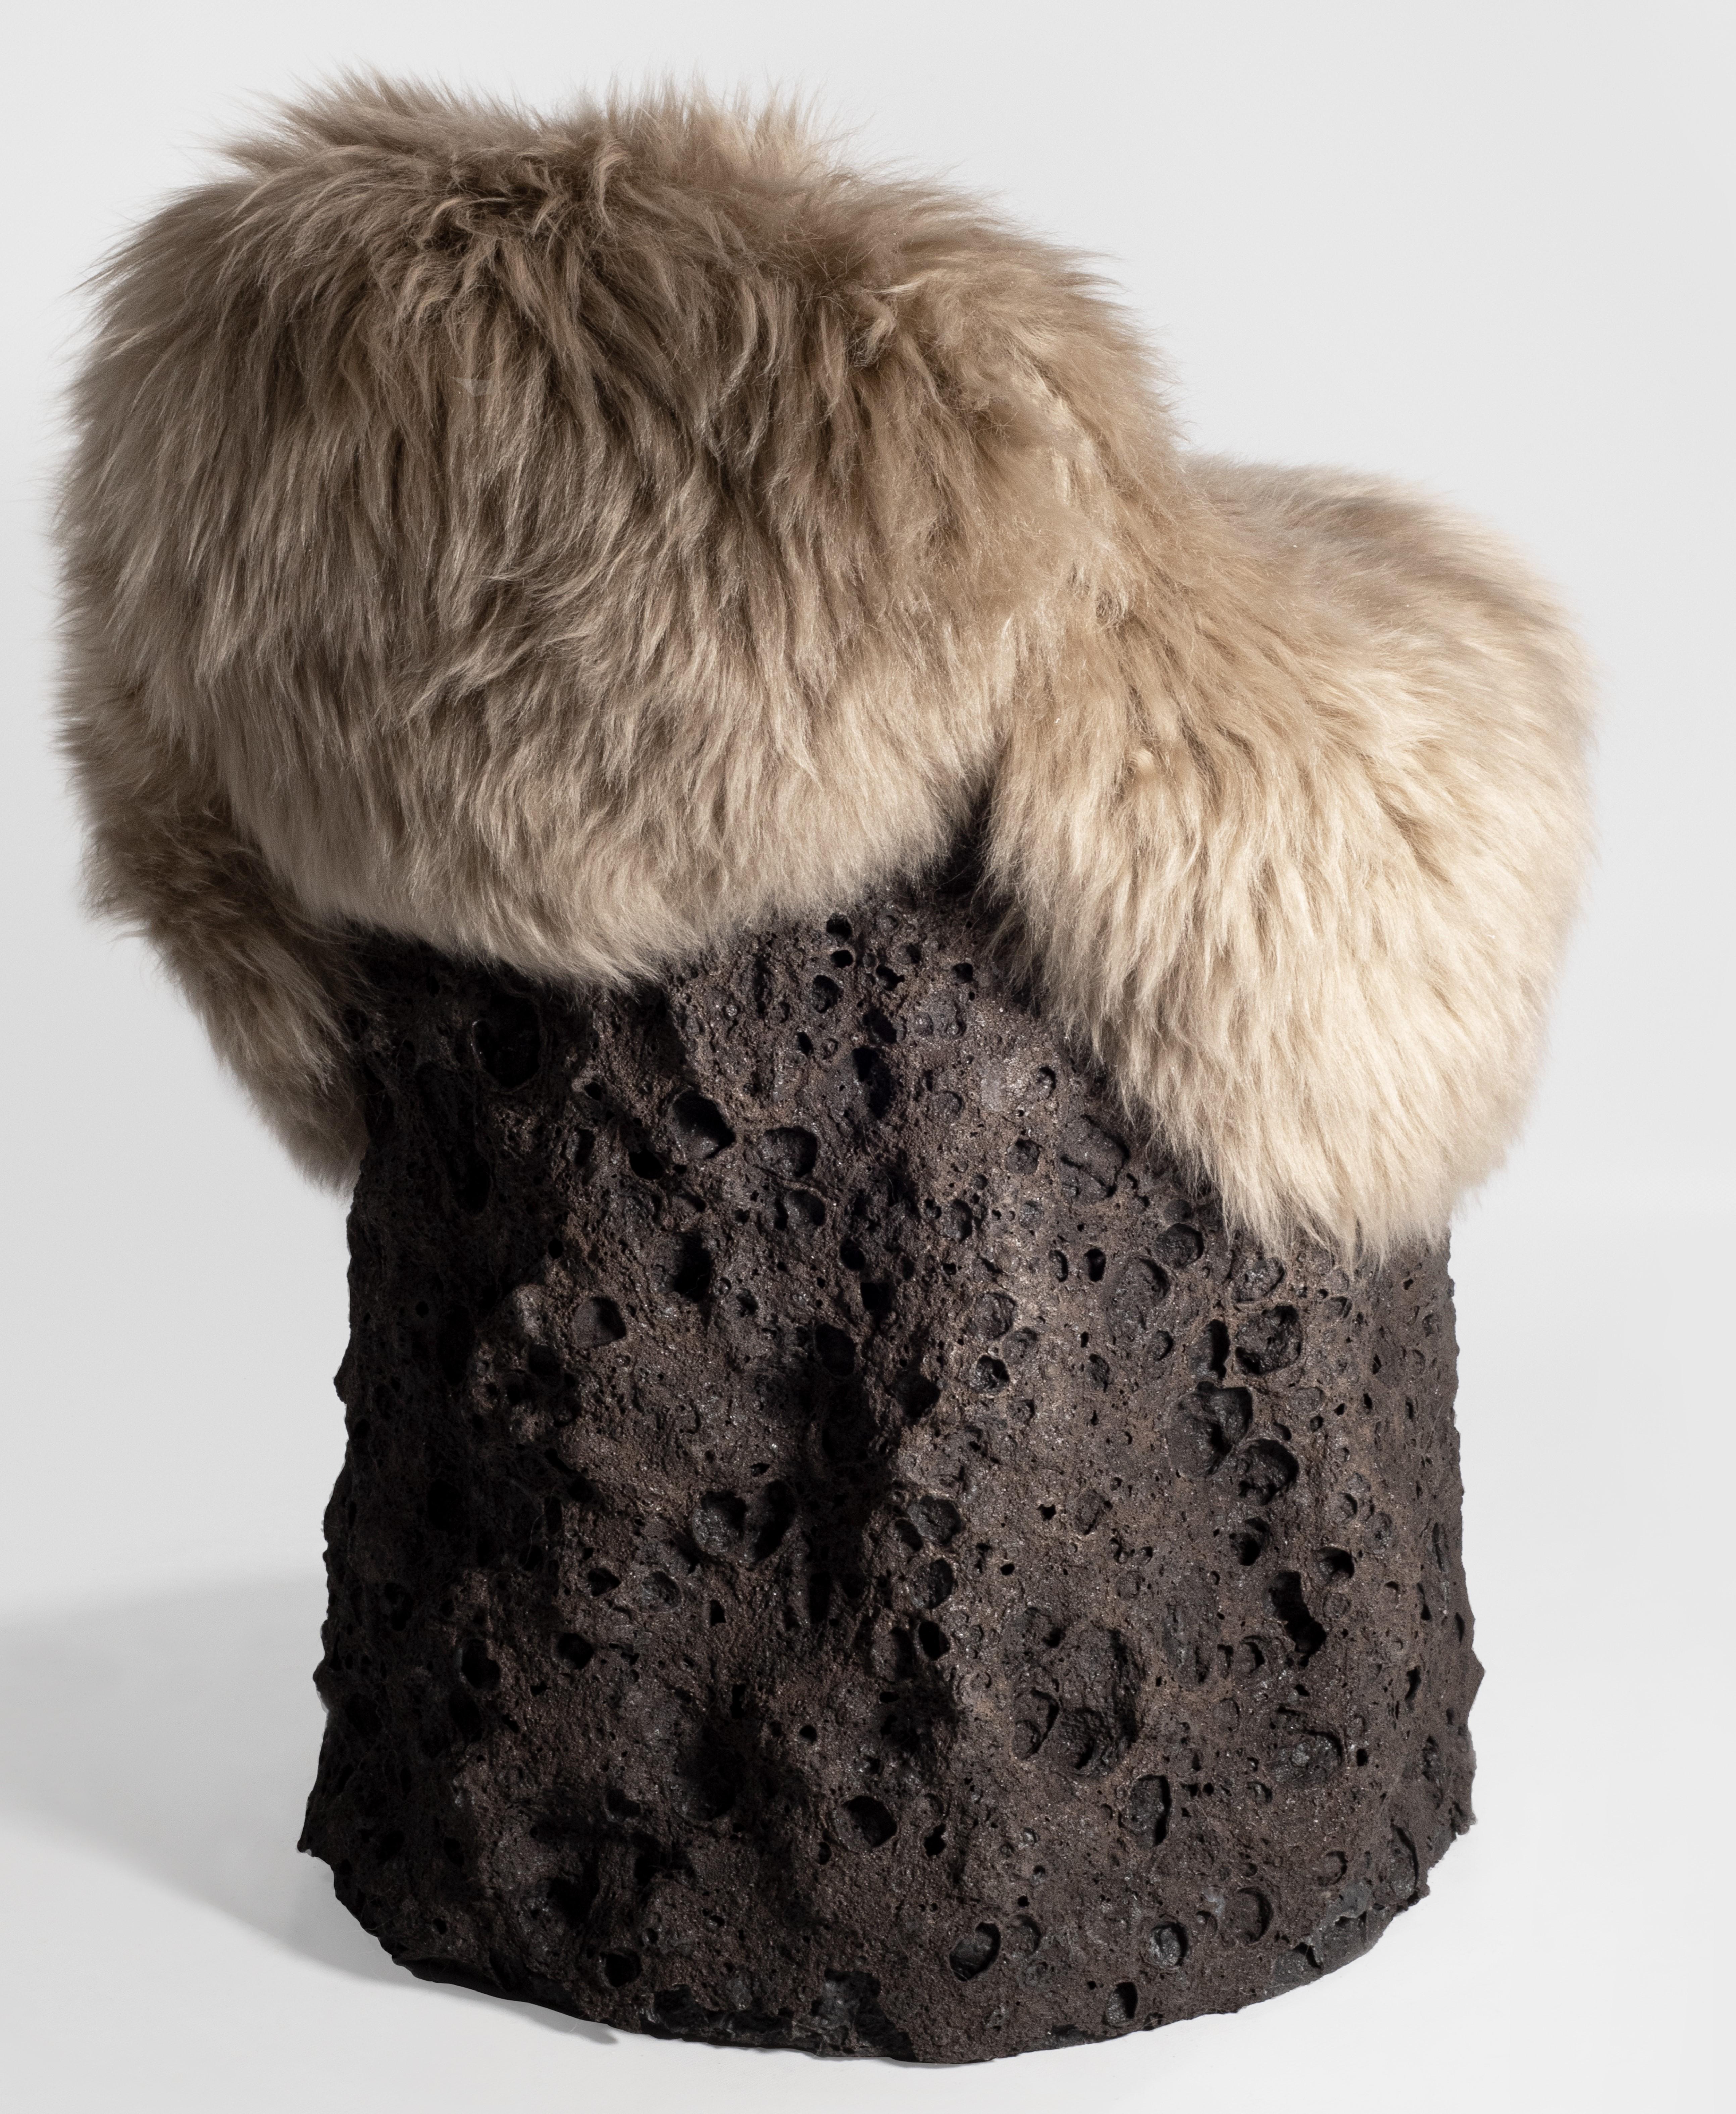 Modern Geoprimitive 021 Ceramic Settle with Sheep Wool by Niclas Wolf